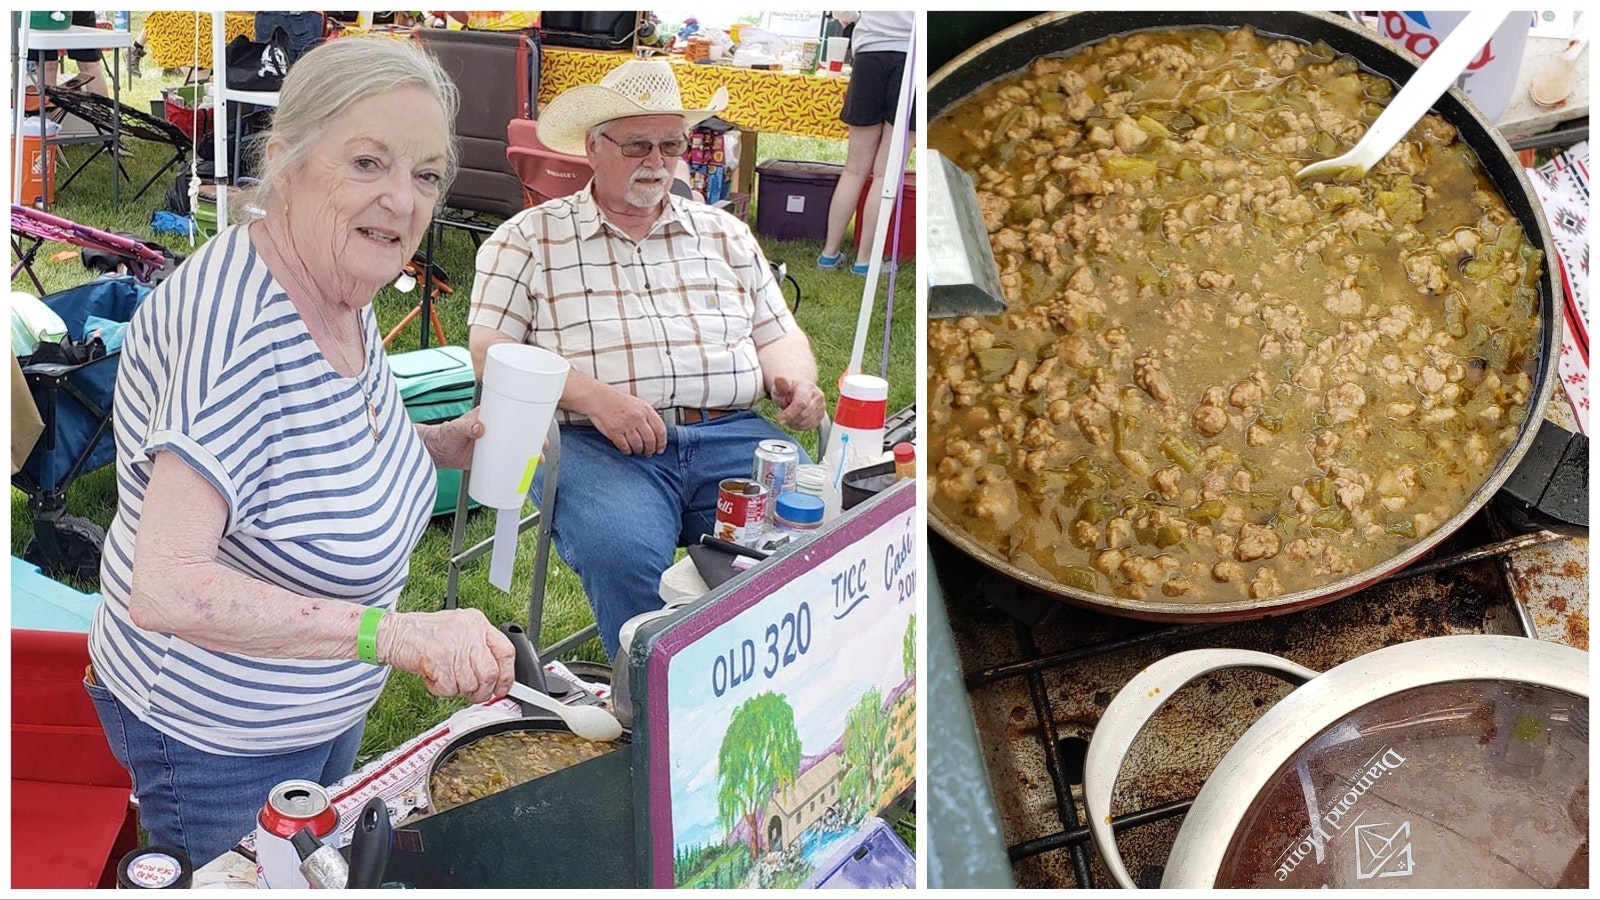 Gloria and Mike Stevens have been all over the country for the past three decades cooking their chili. Gloria's green chili won this year's Chugwater Chili Cookoff.